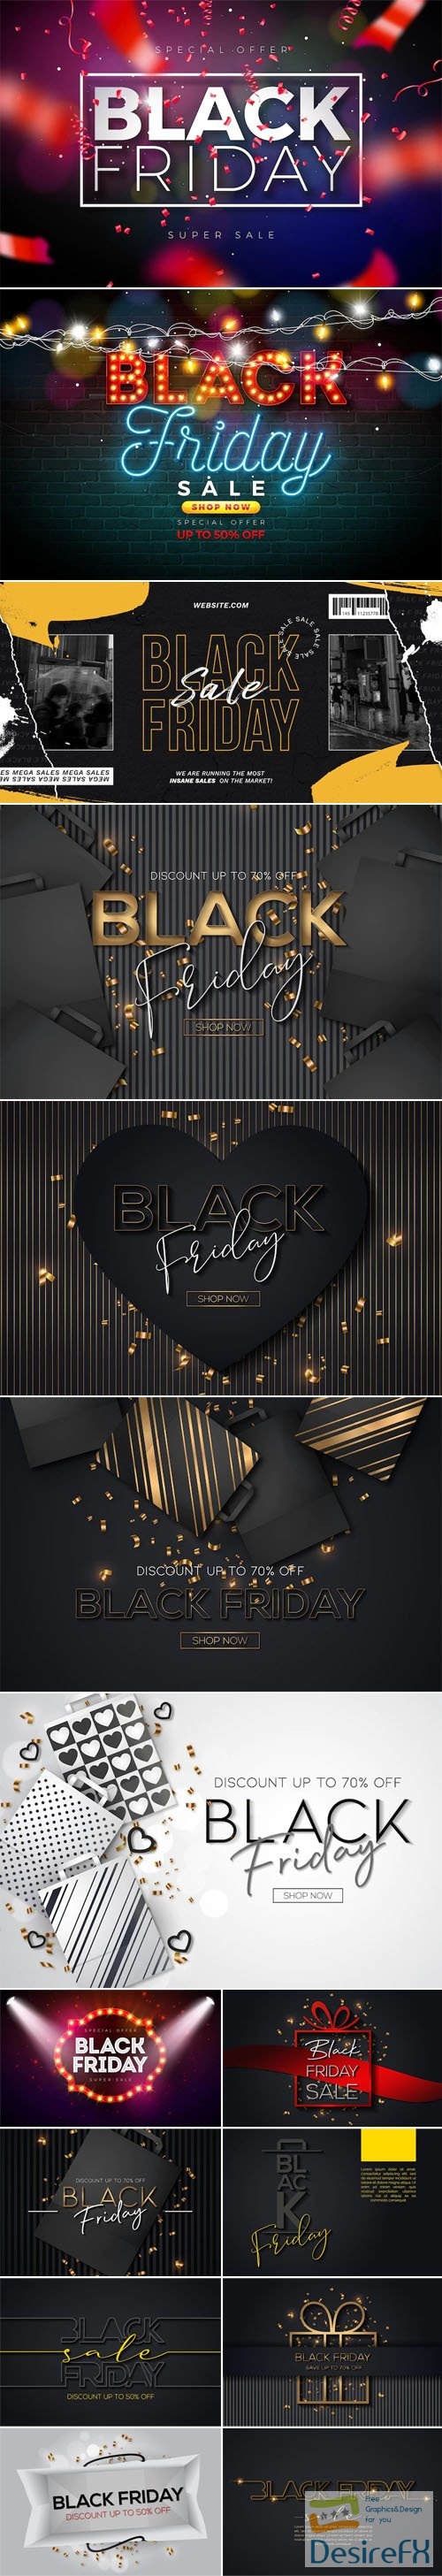 Black Friday - 15 Creative Backgrounds Vector Templates